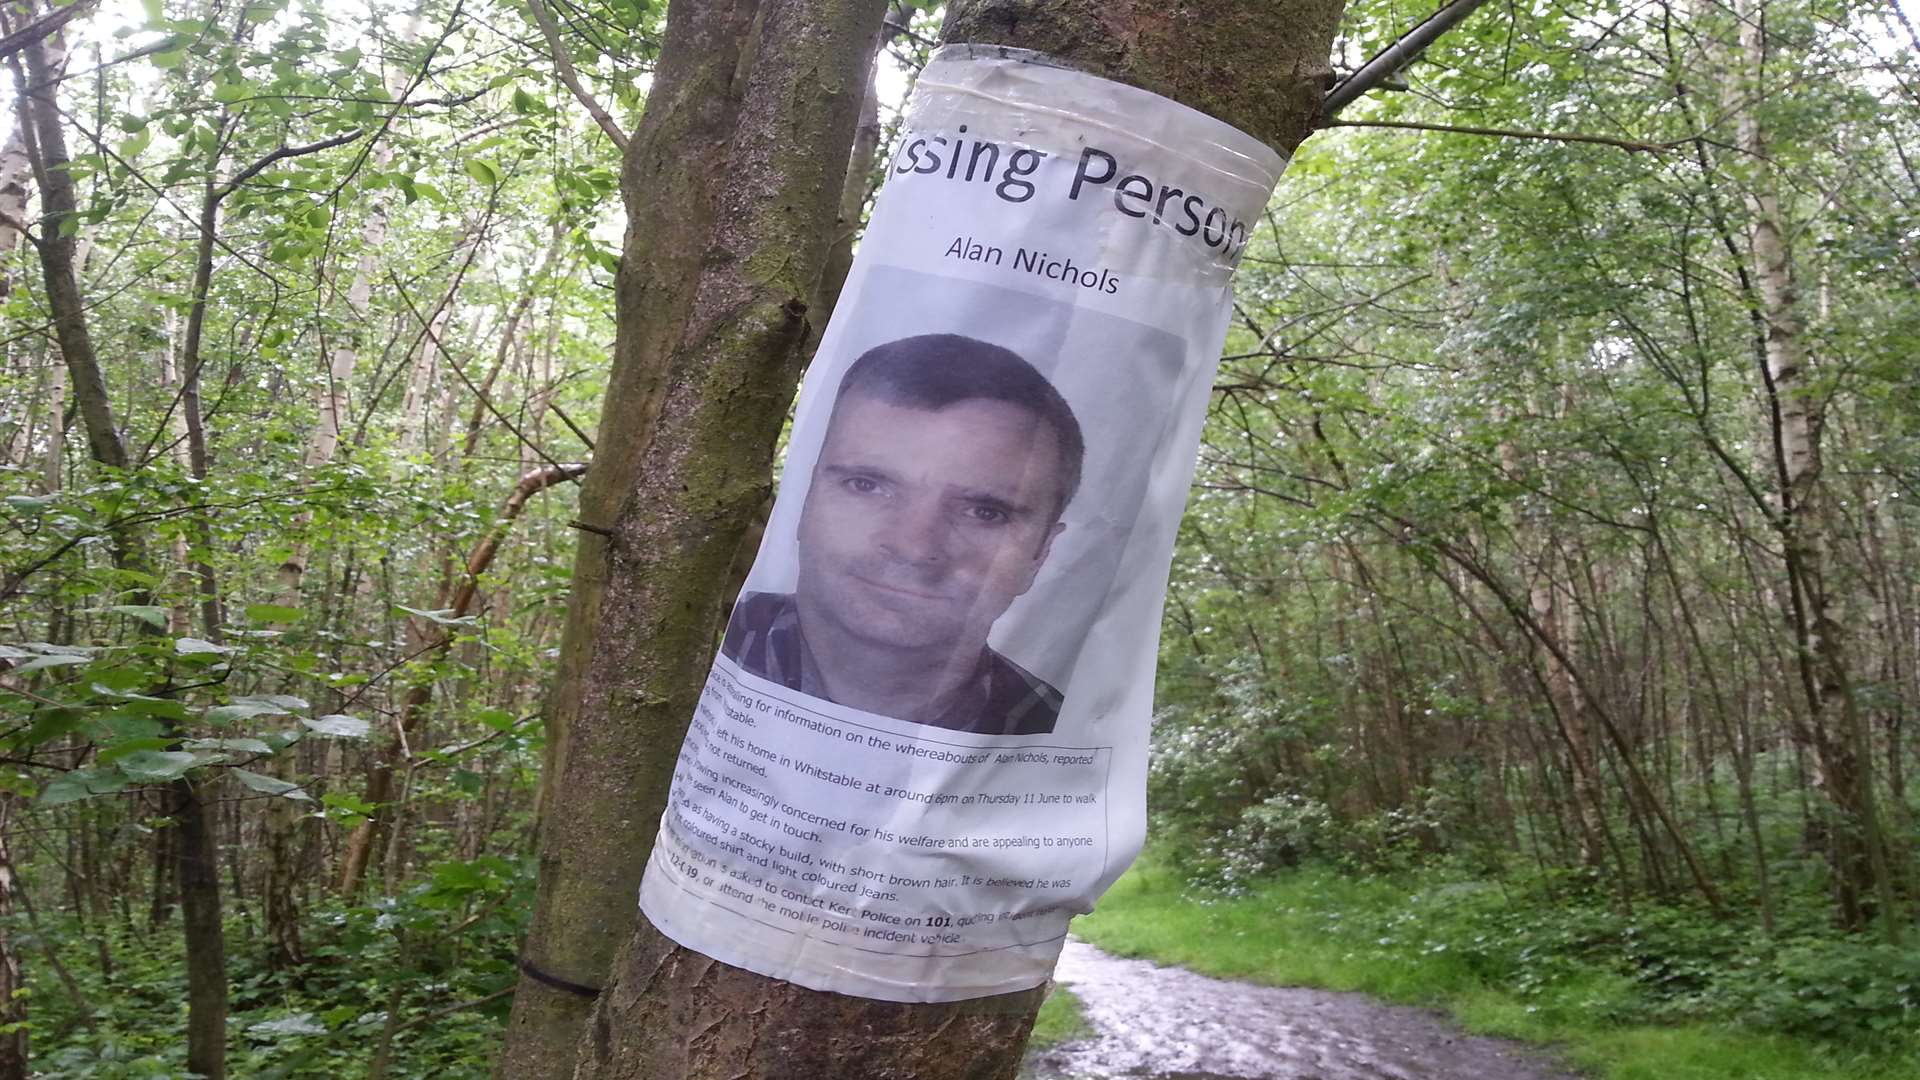 Missing person posters were put up in Clowes Woods in June